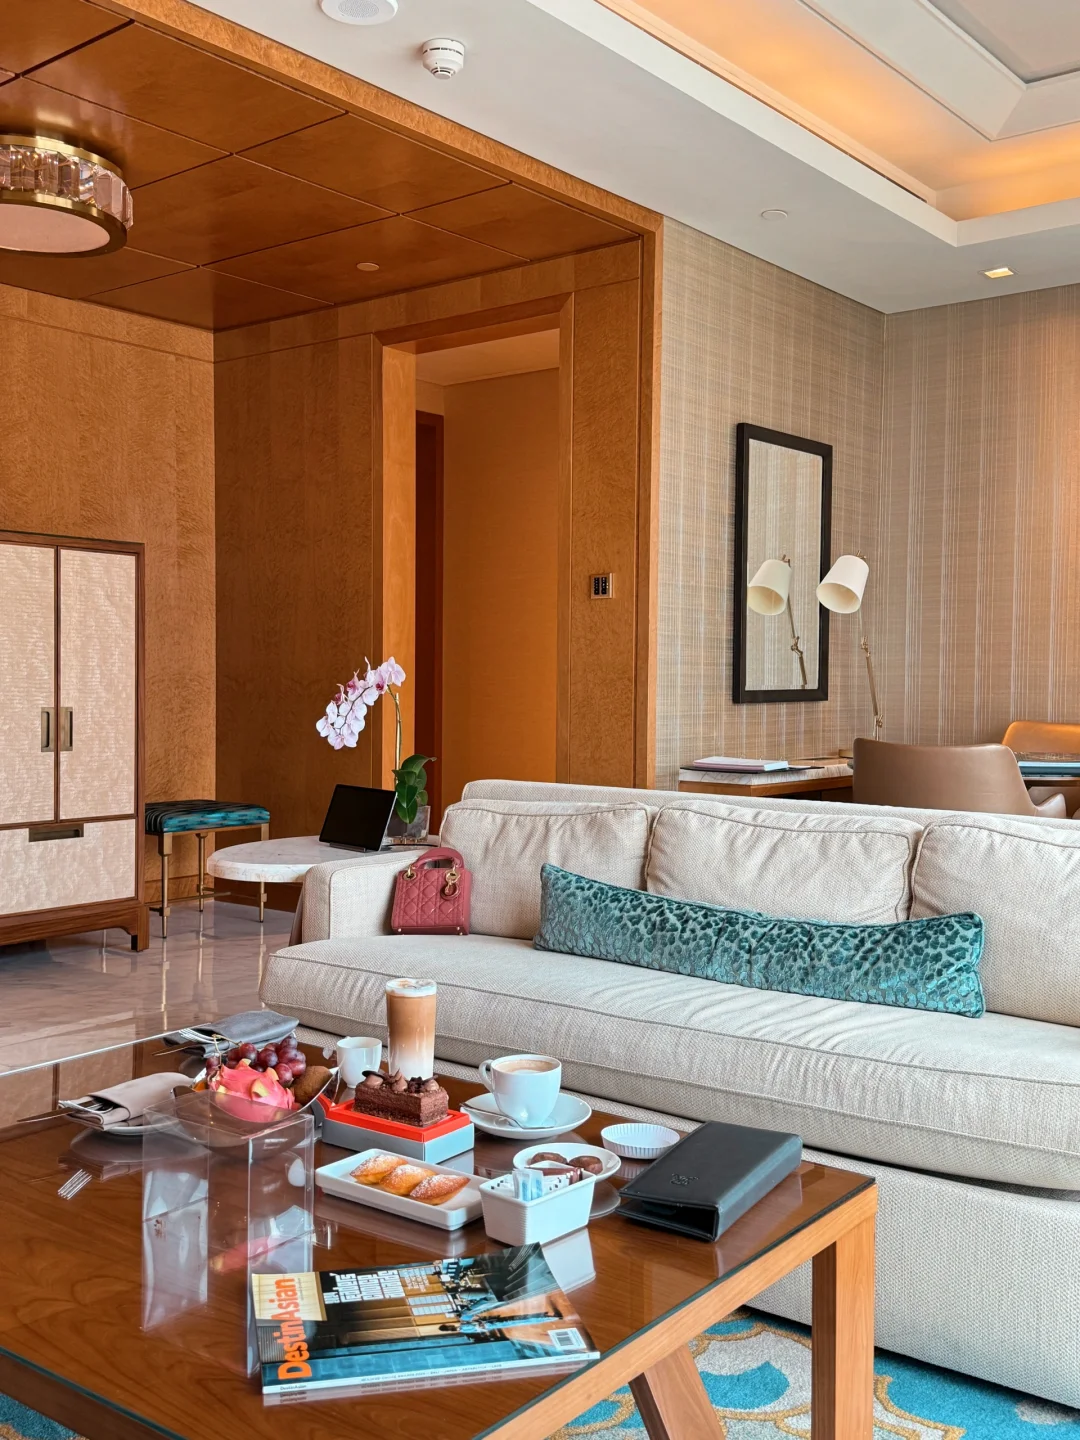 Macao-Stay in the 1317 Internet celebrity room at the St. Regis Macau, with 24-hour free beverage service